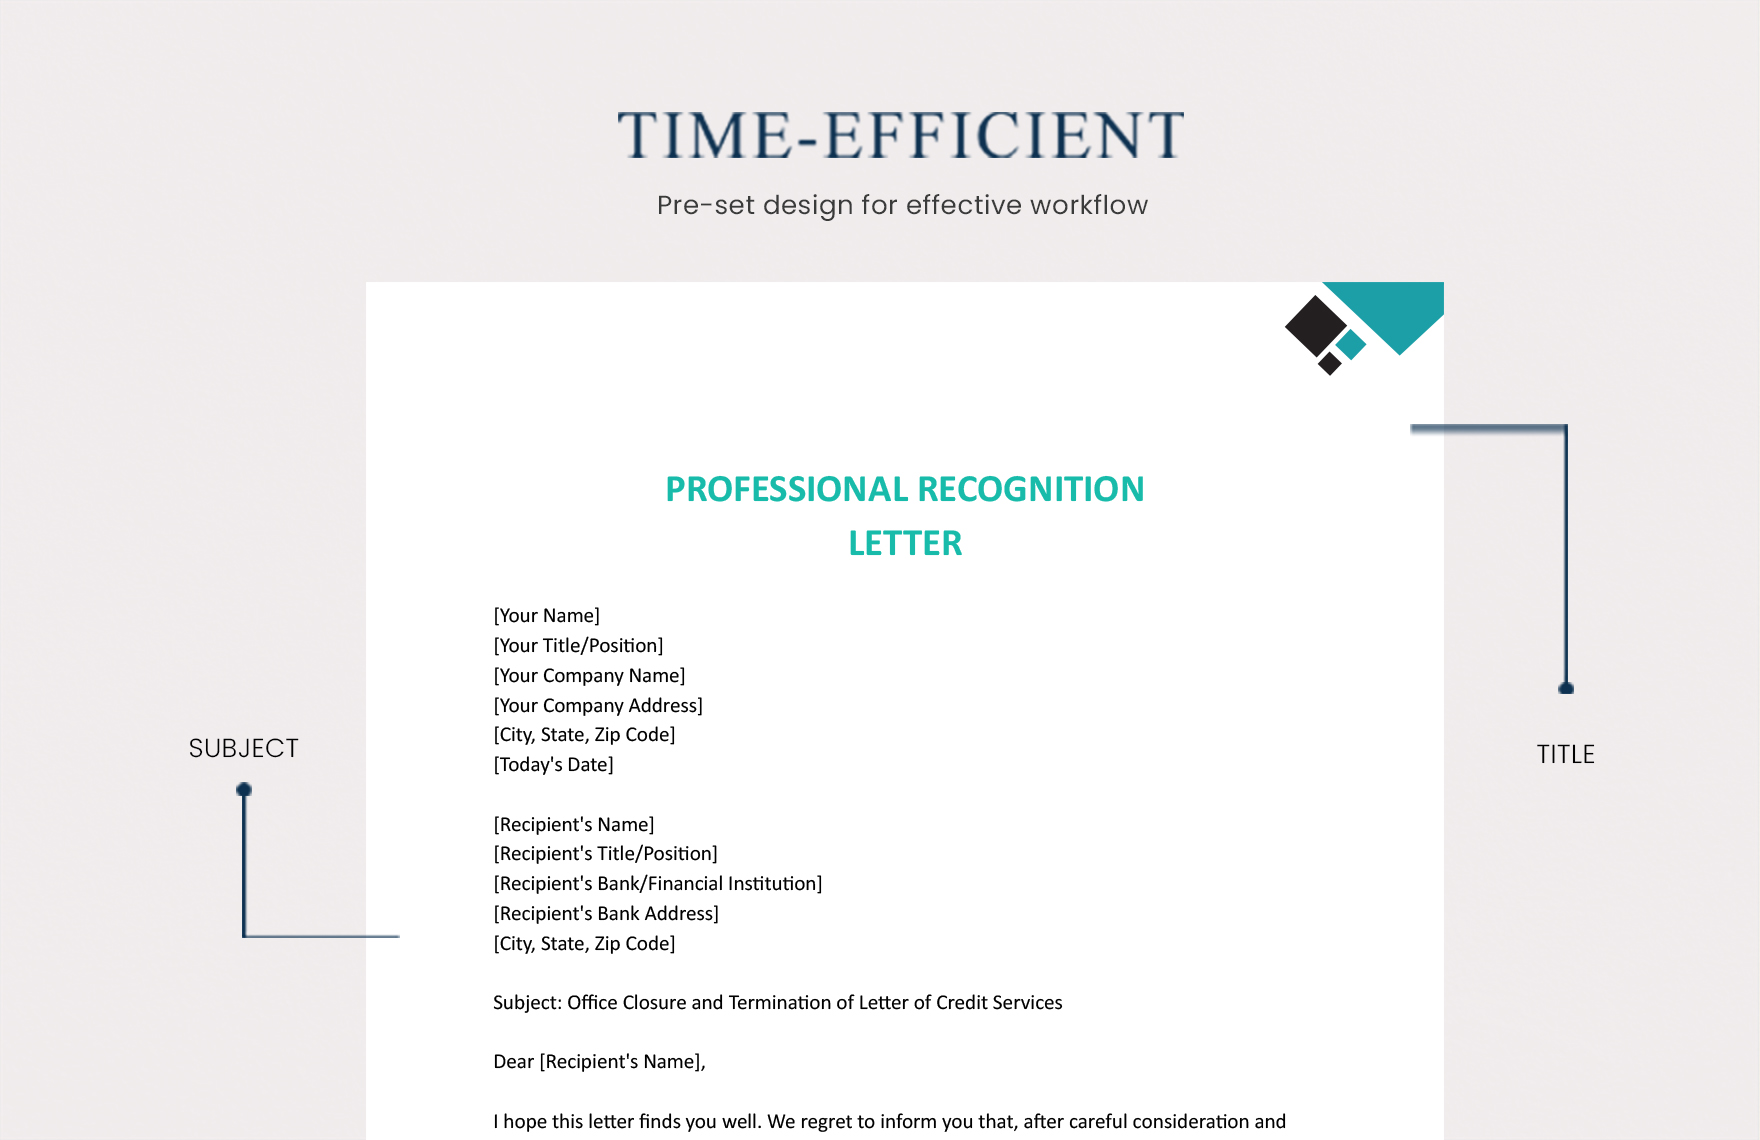 Professional Recognition Letter